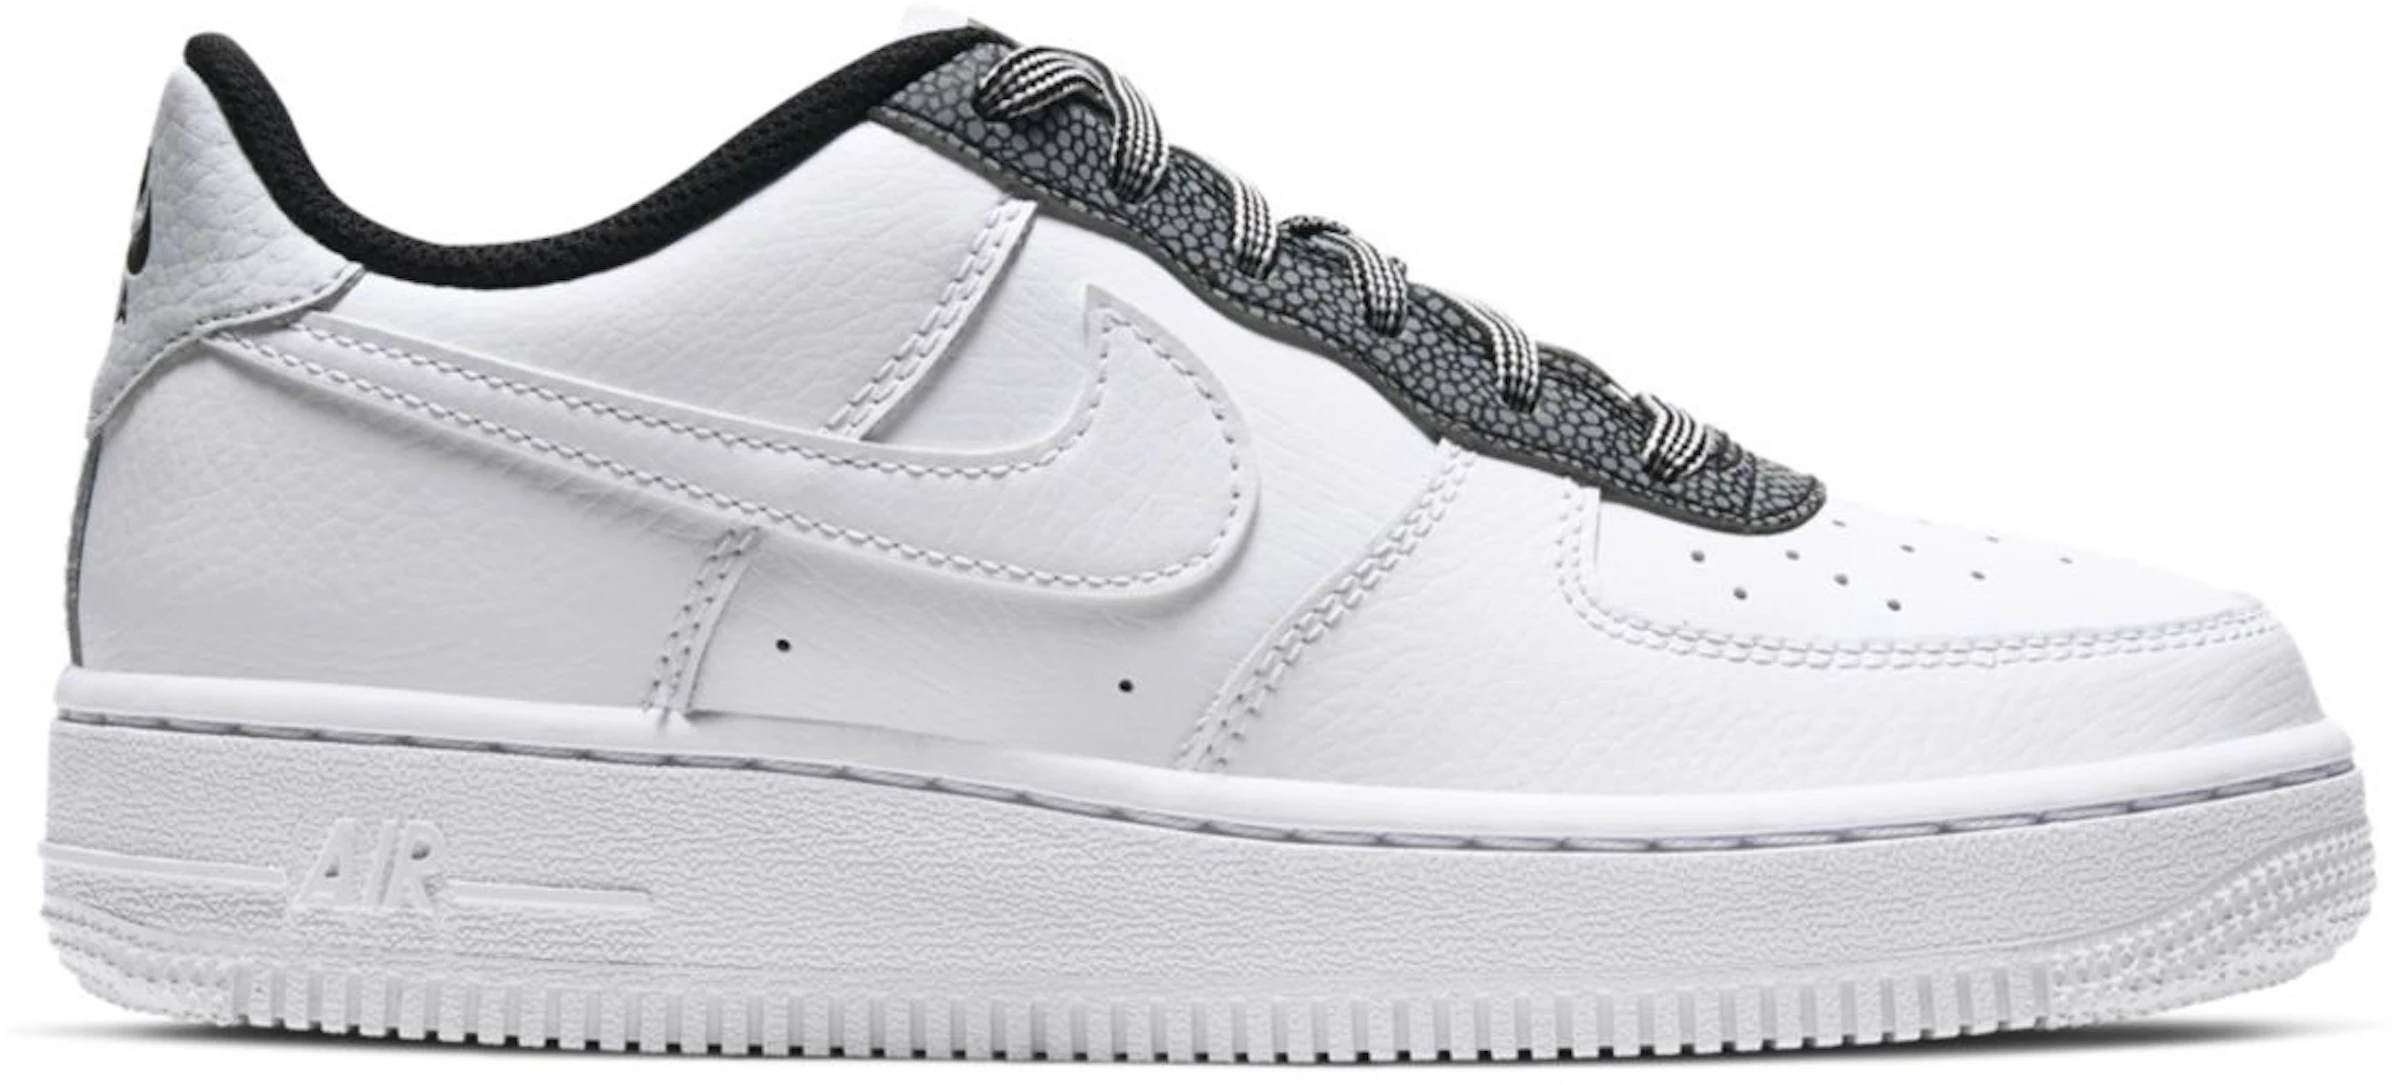 periodieke Bermad Fauteuil Nike Air Force 1 Low LV8 White Cool Grey (GS) - CN5715-100 - US